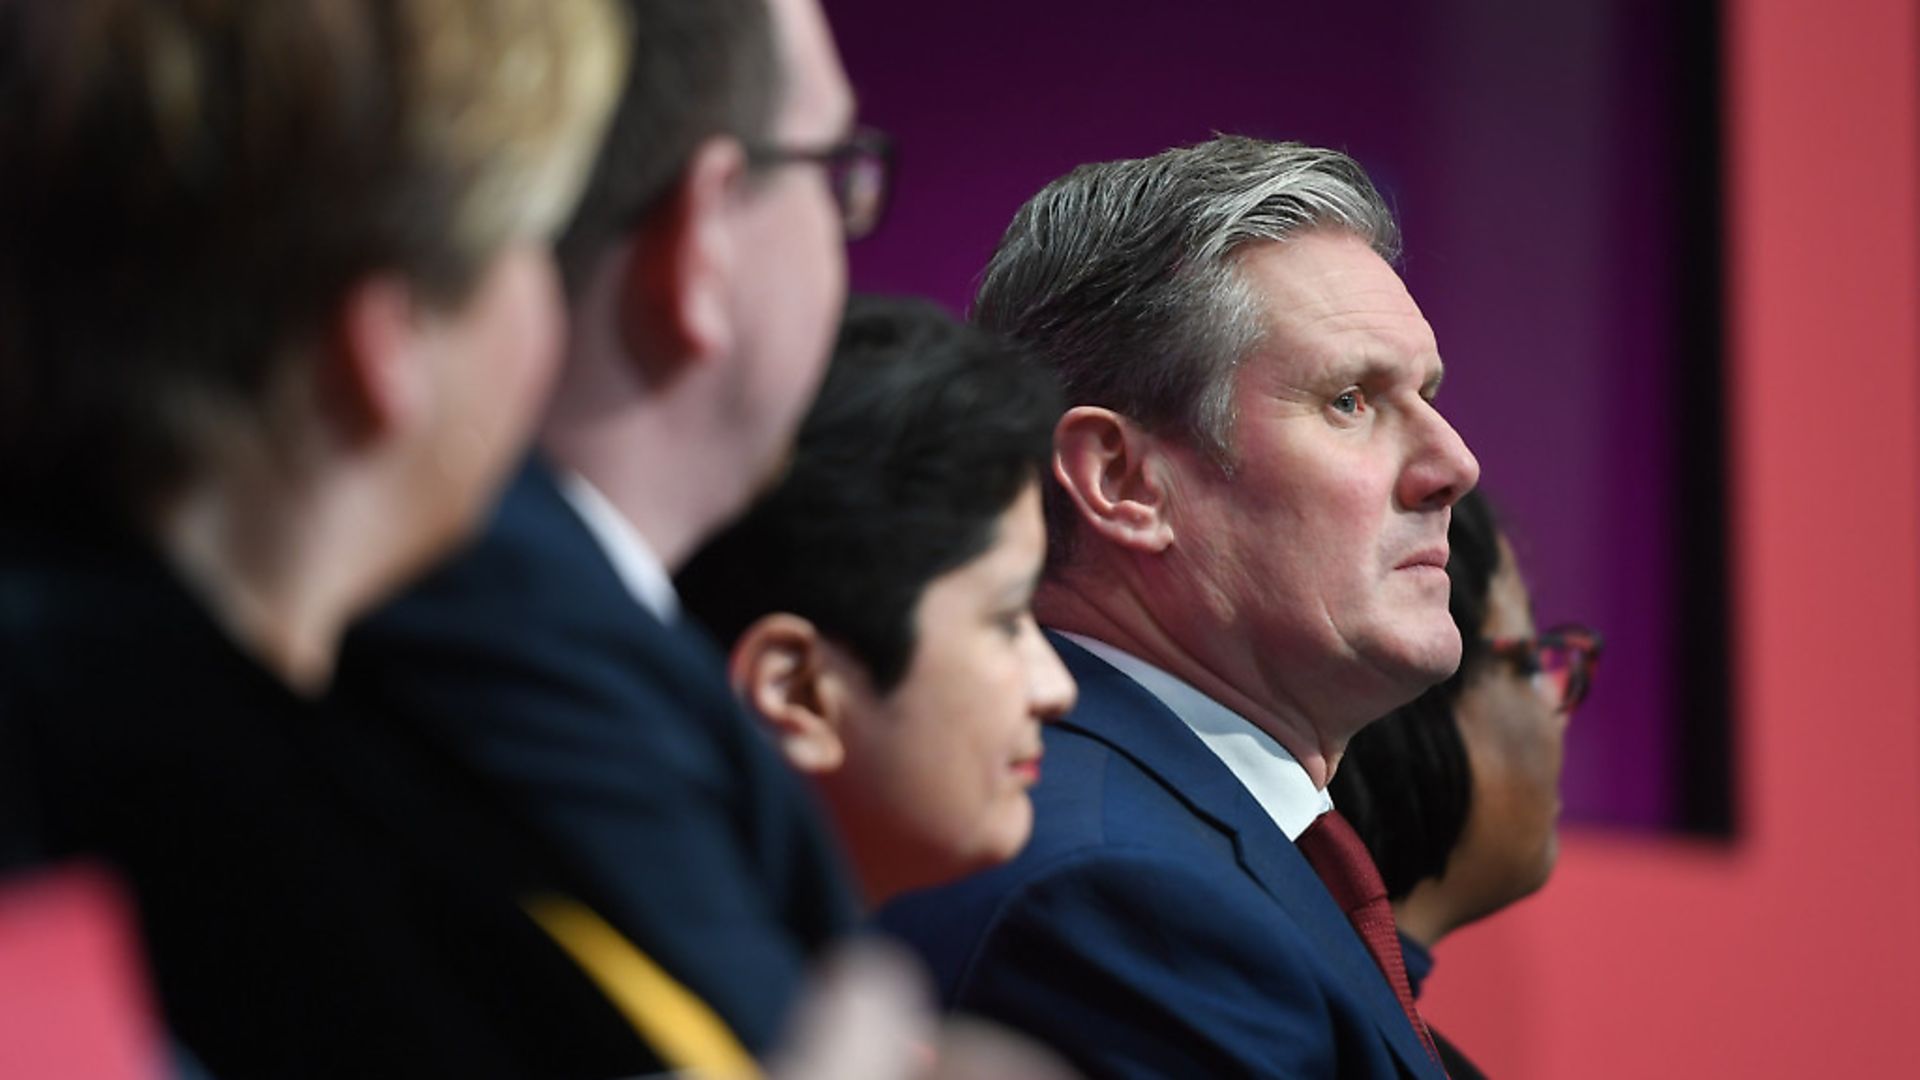 Sir Keir Starmer during a Labour Party event before he became leader. Photograph: Joe Giddens/PA. - Credit: PA